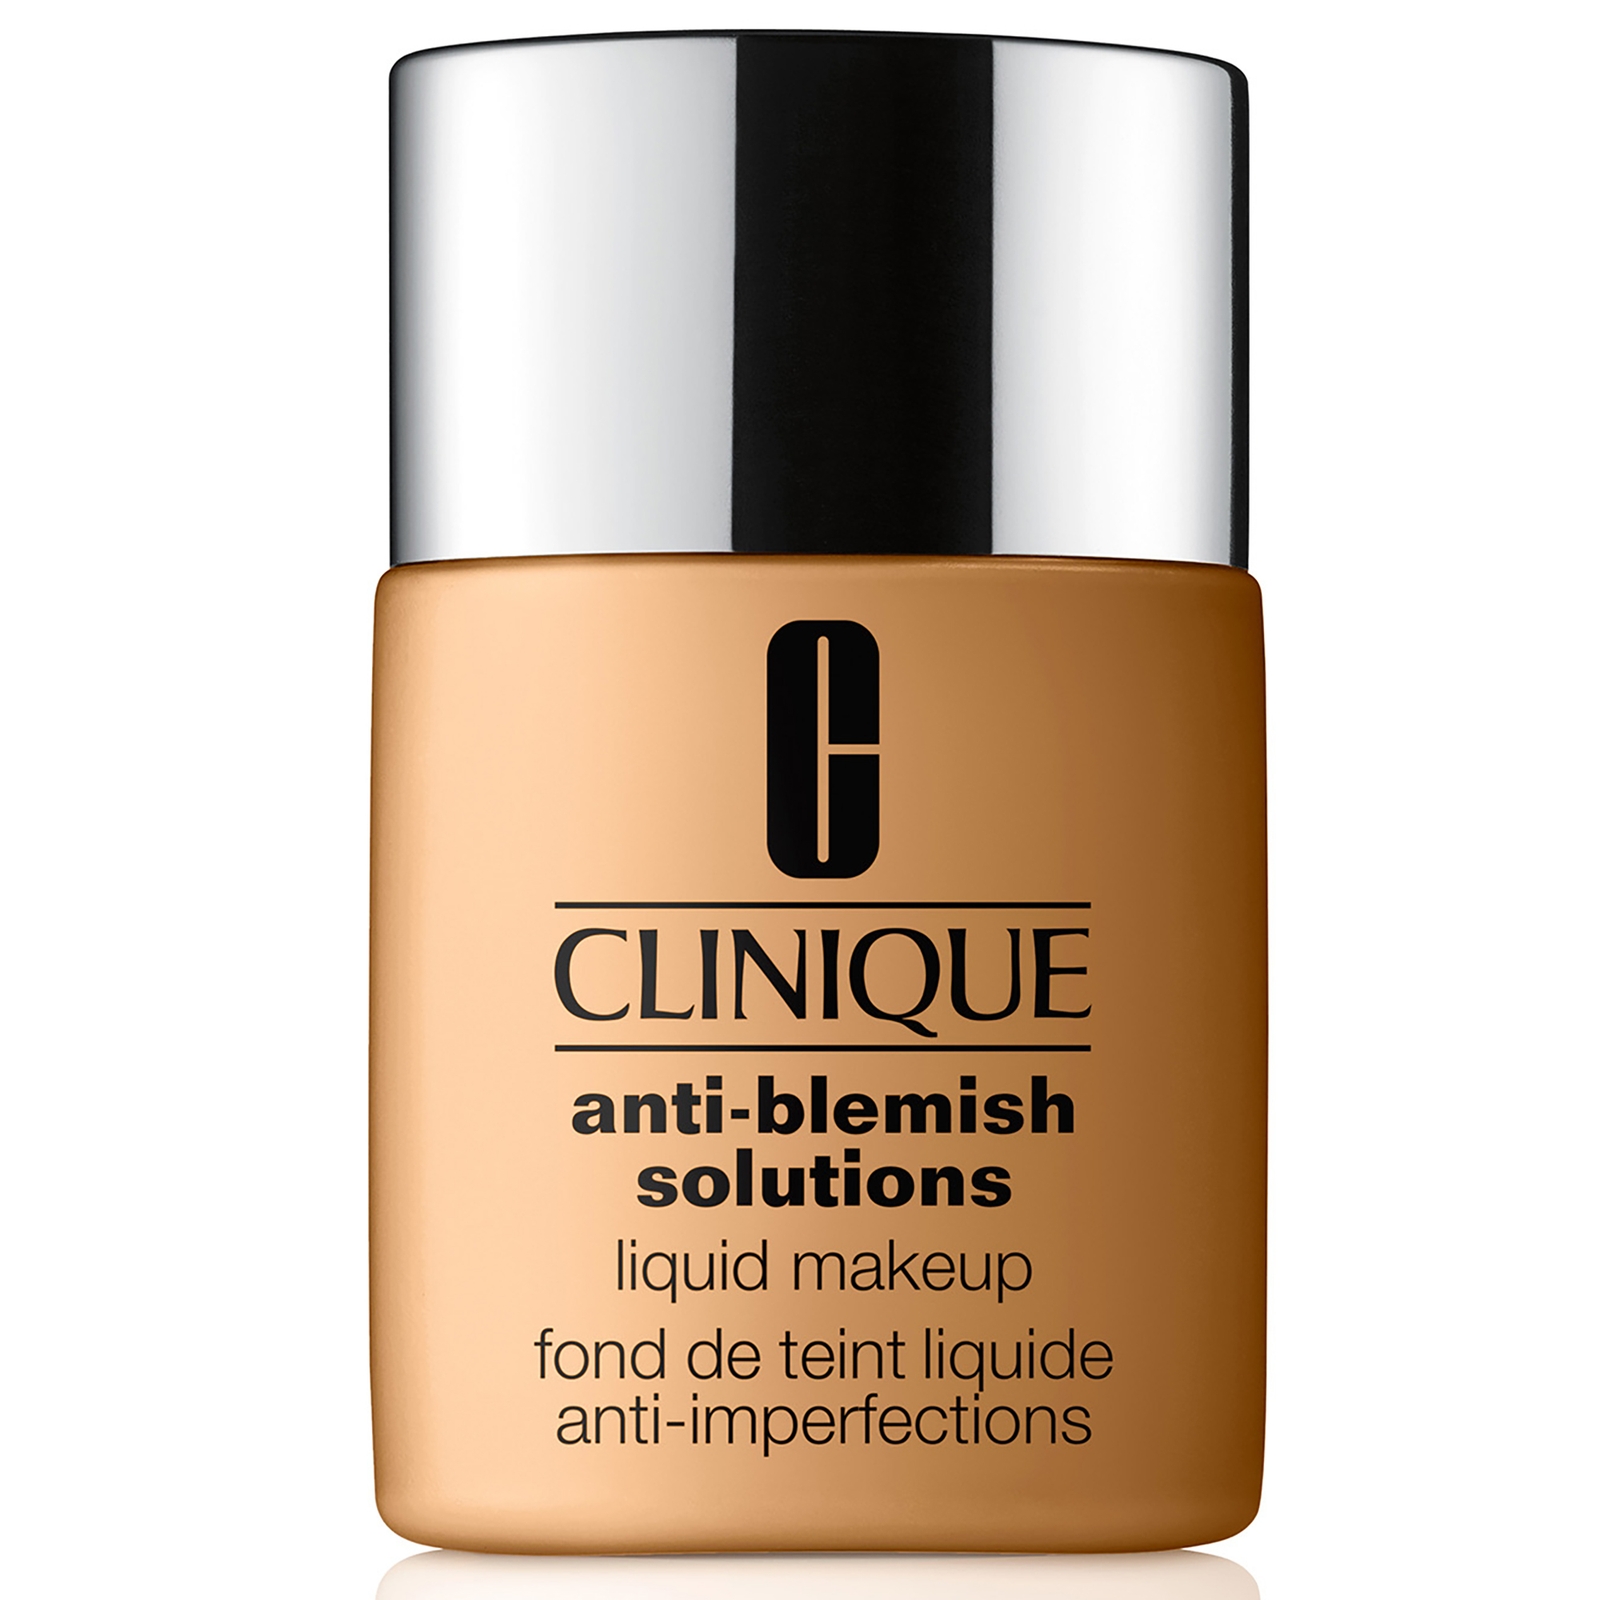 Clinique Anti-Blemish Solutions Liquid Makeup with Salicylic Acid 30ml (Various Shades) - CN 58 Hone